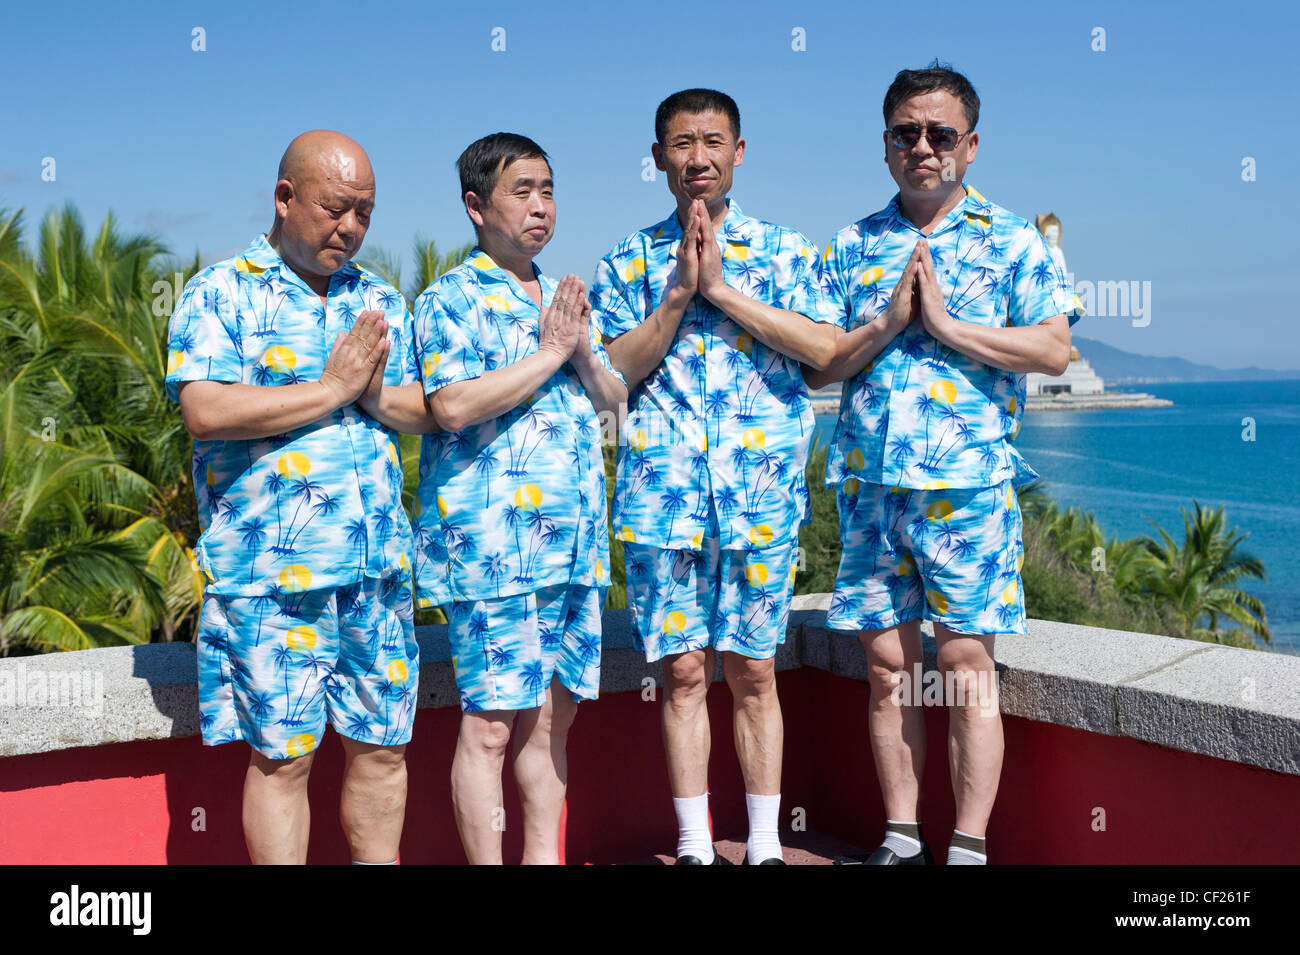 Four Chinese men in matching blue shirts and shorts get their picture taken in a prayer pose Stock Photo